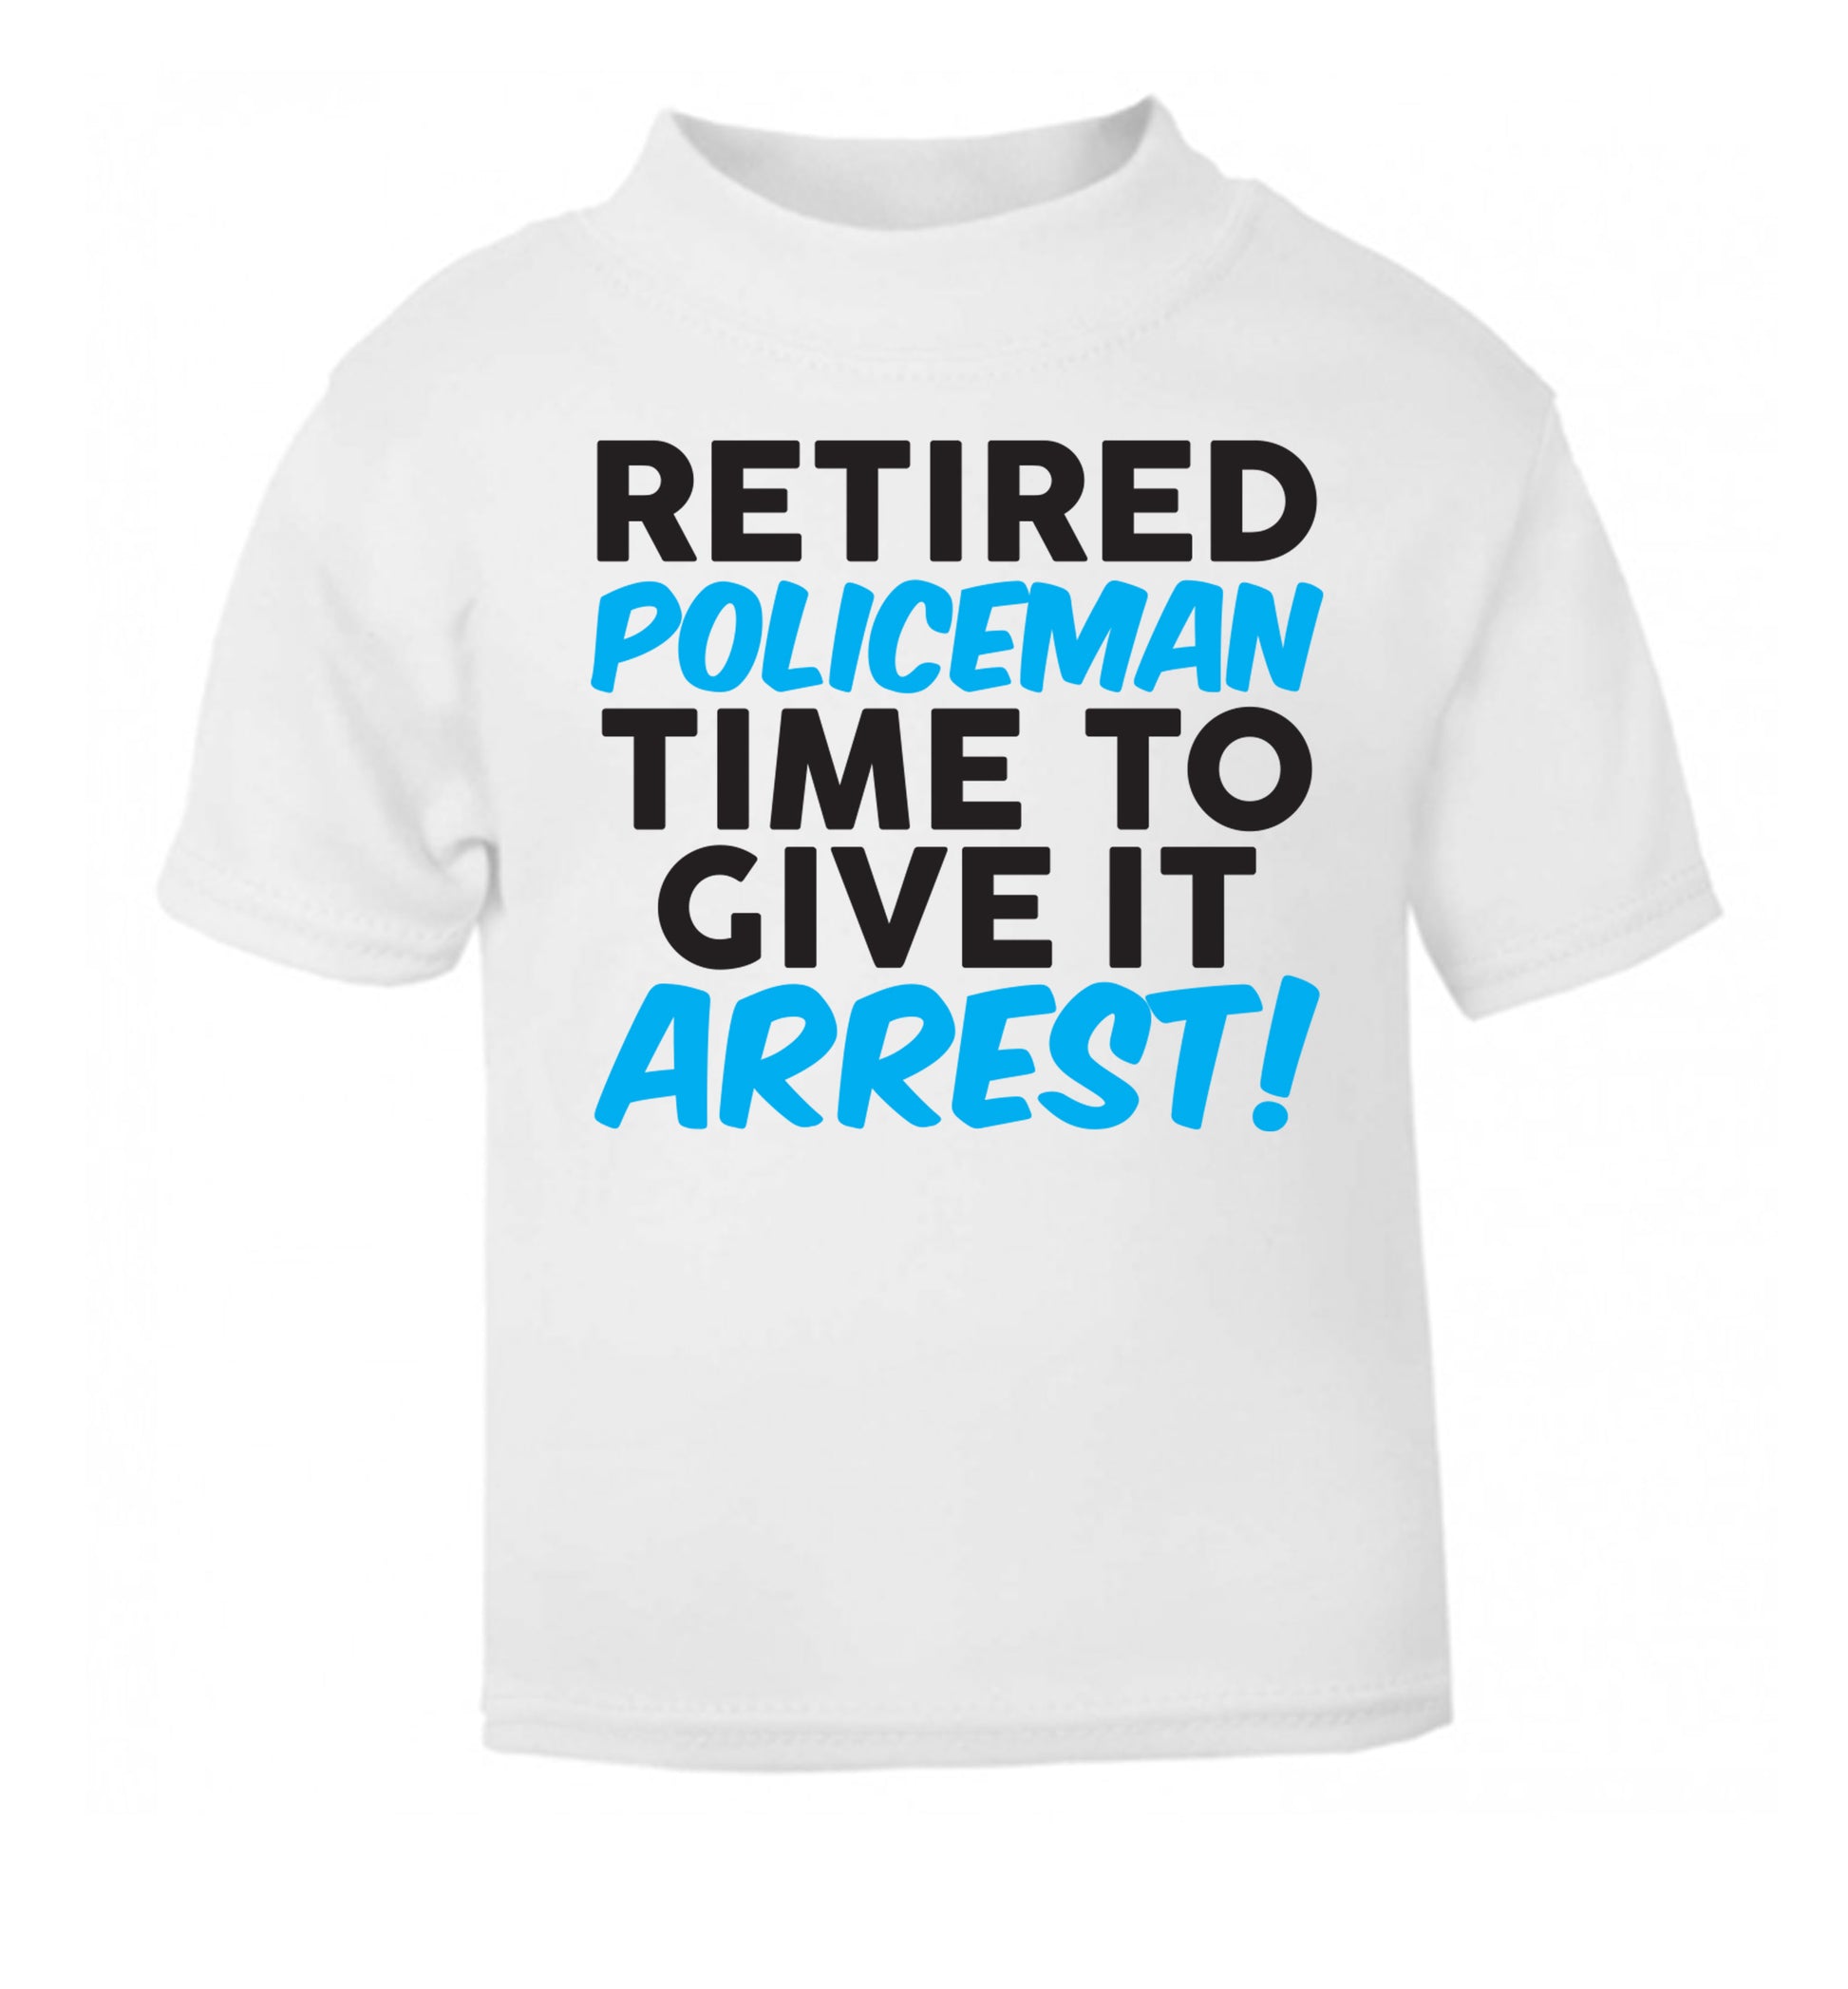 Retired policeman give it arresst! white Baby Toddler Tshirt 2 Years